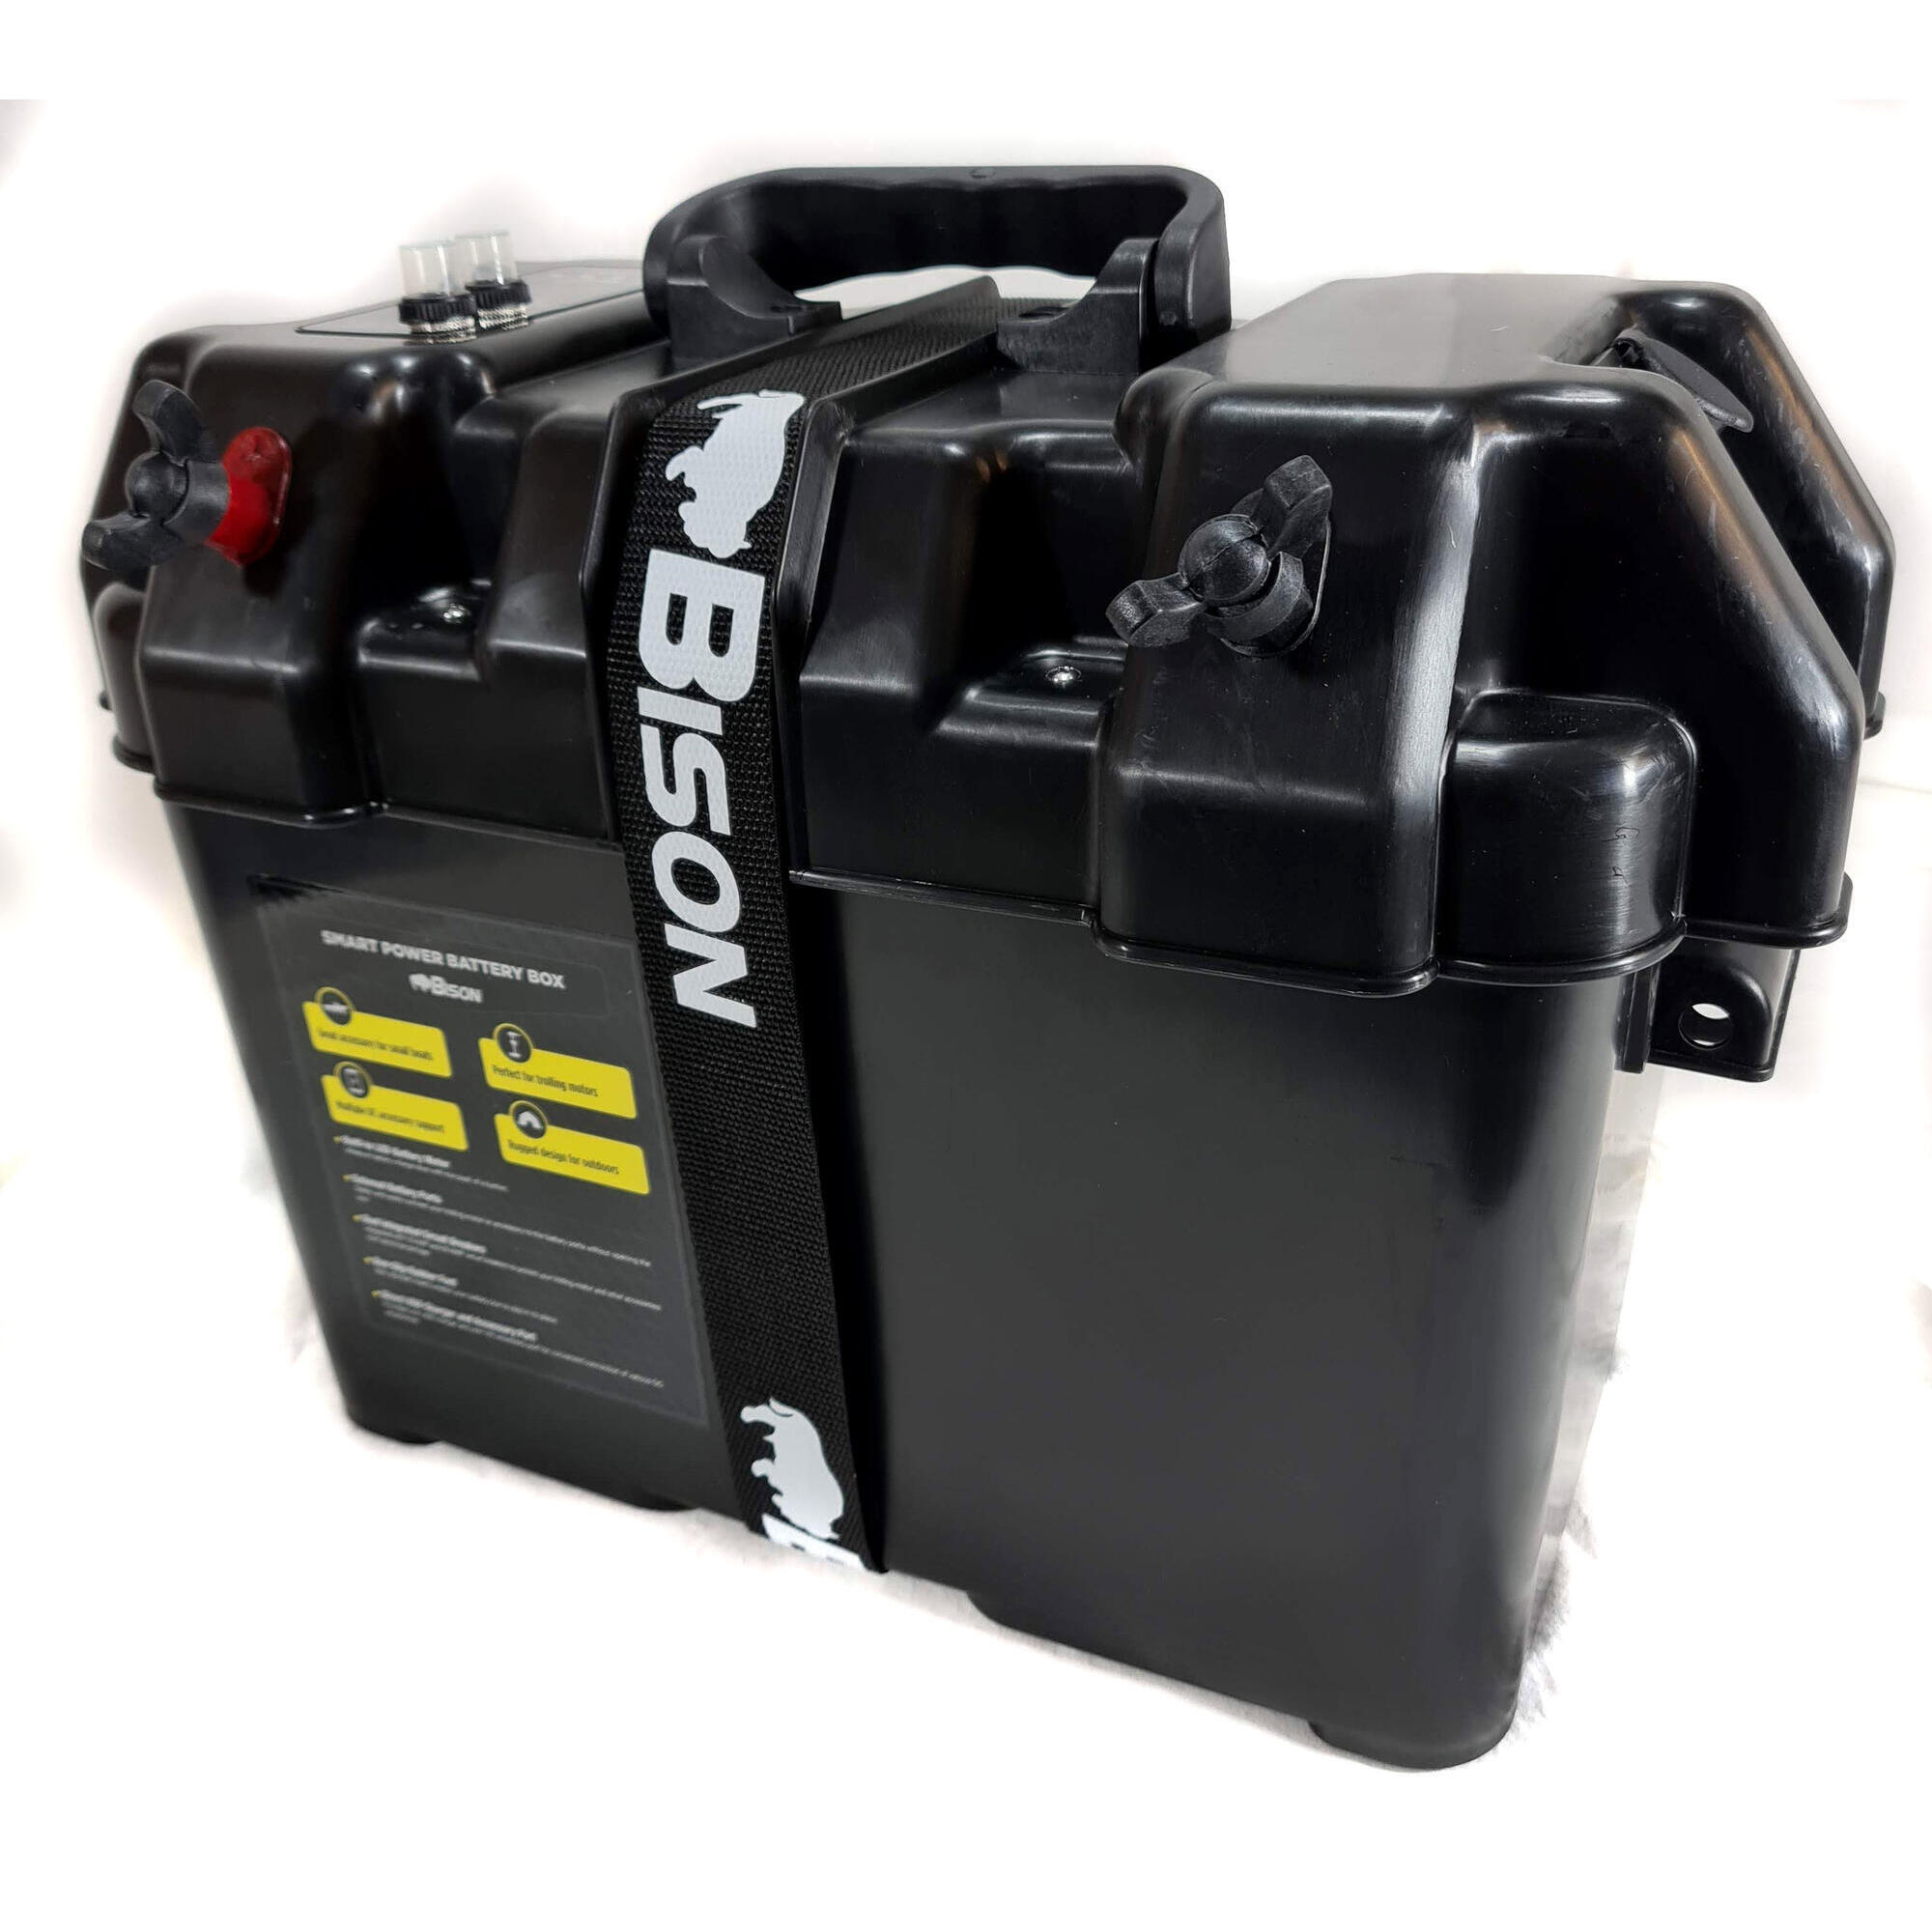 Bison Smart Battery Box with 4 extra USB outputs 1/5